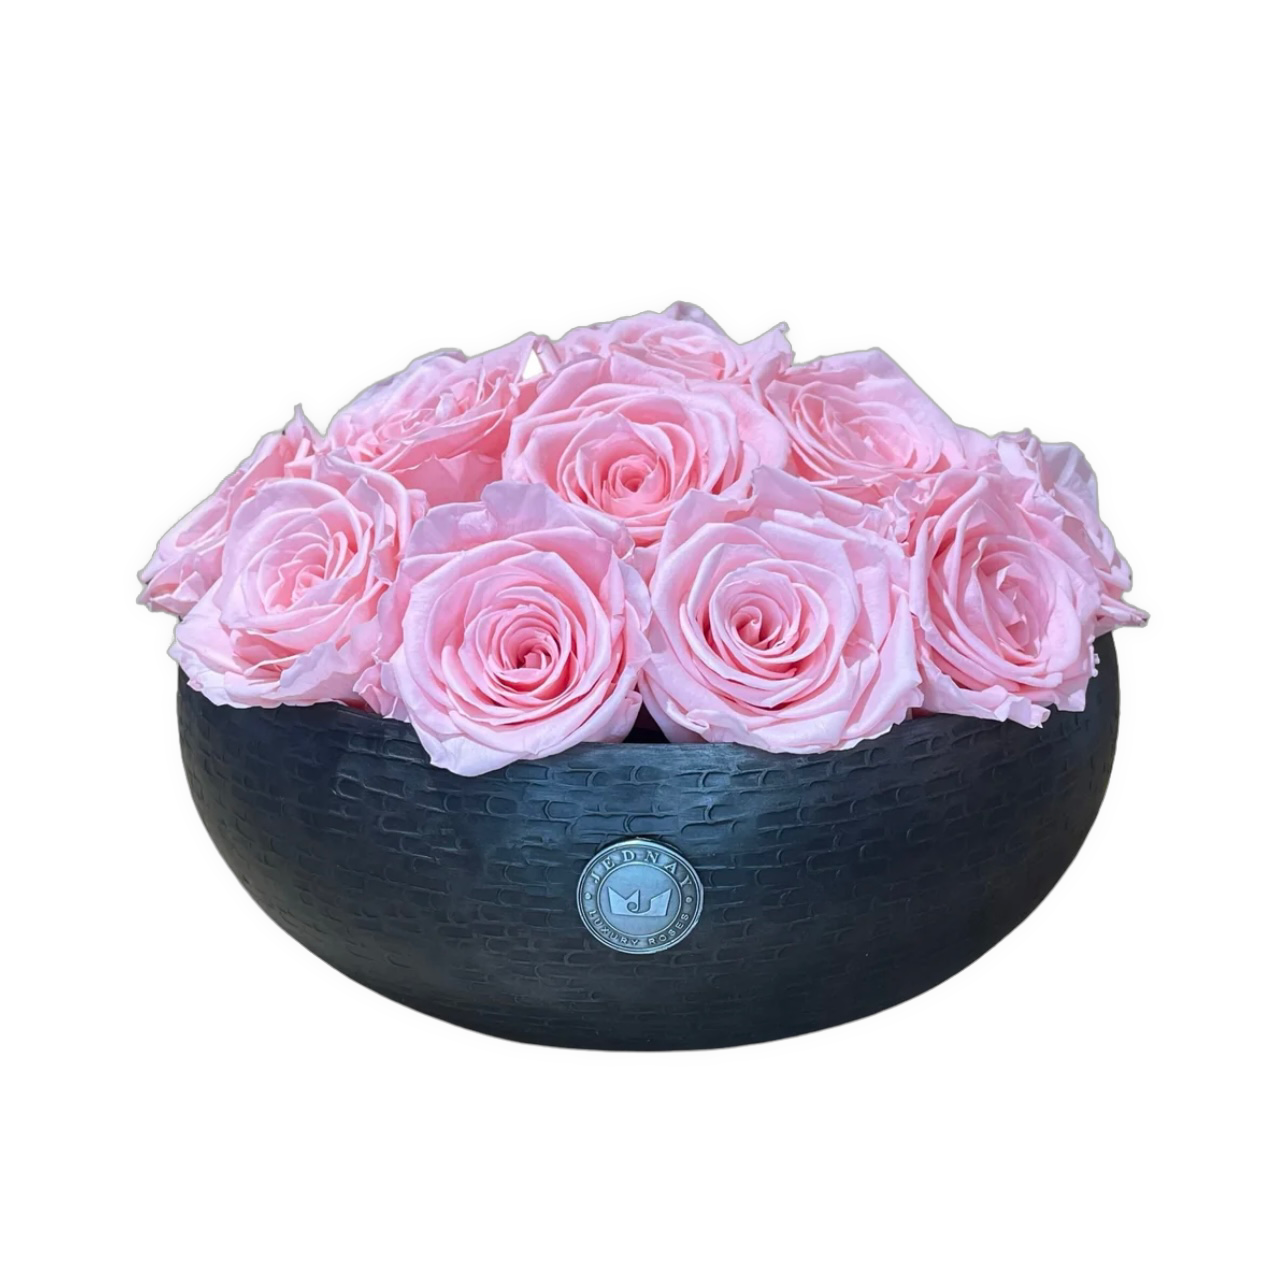 The Knightsbridge - Soft Pink Forever Roses - Pewter Bowl